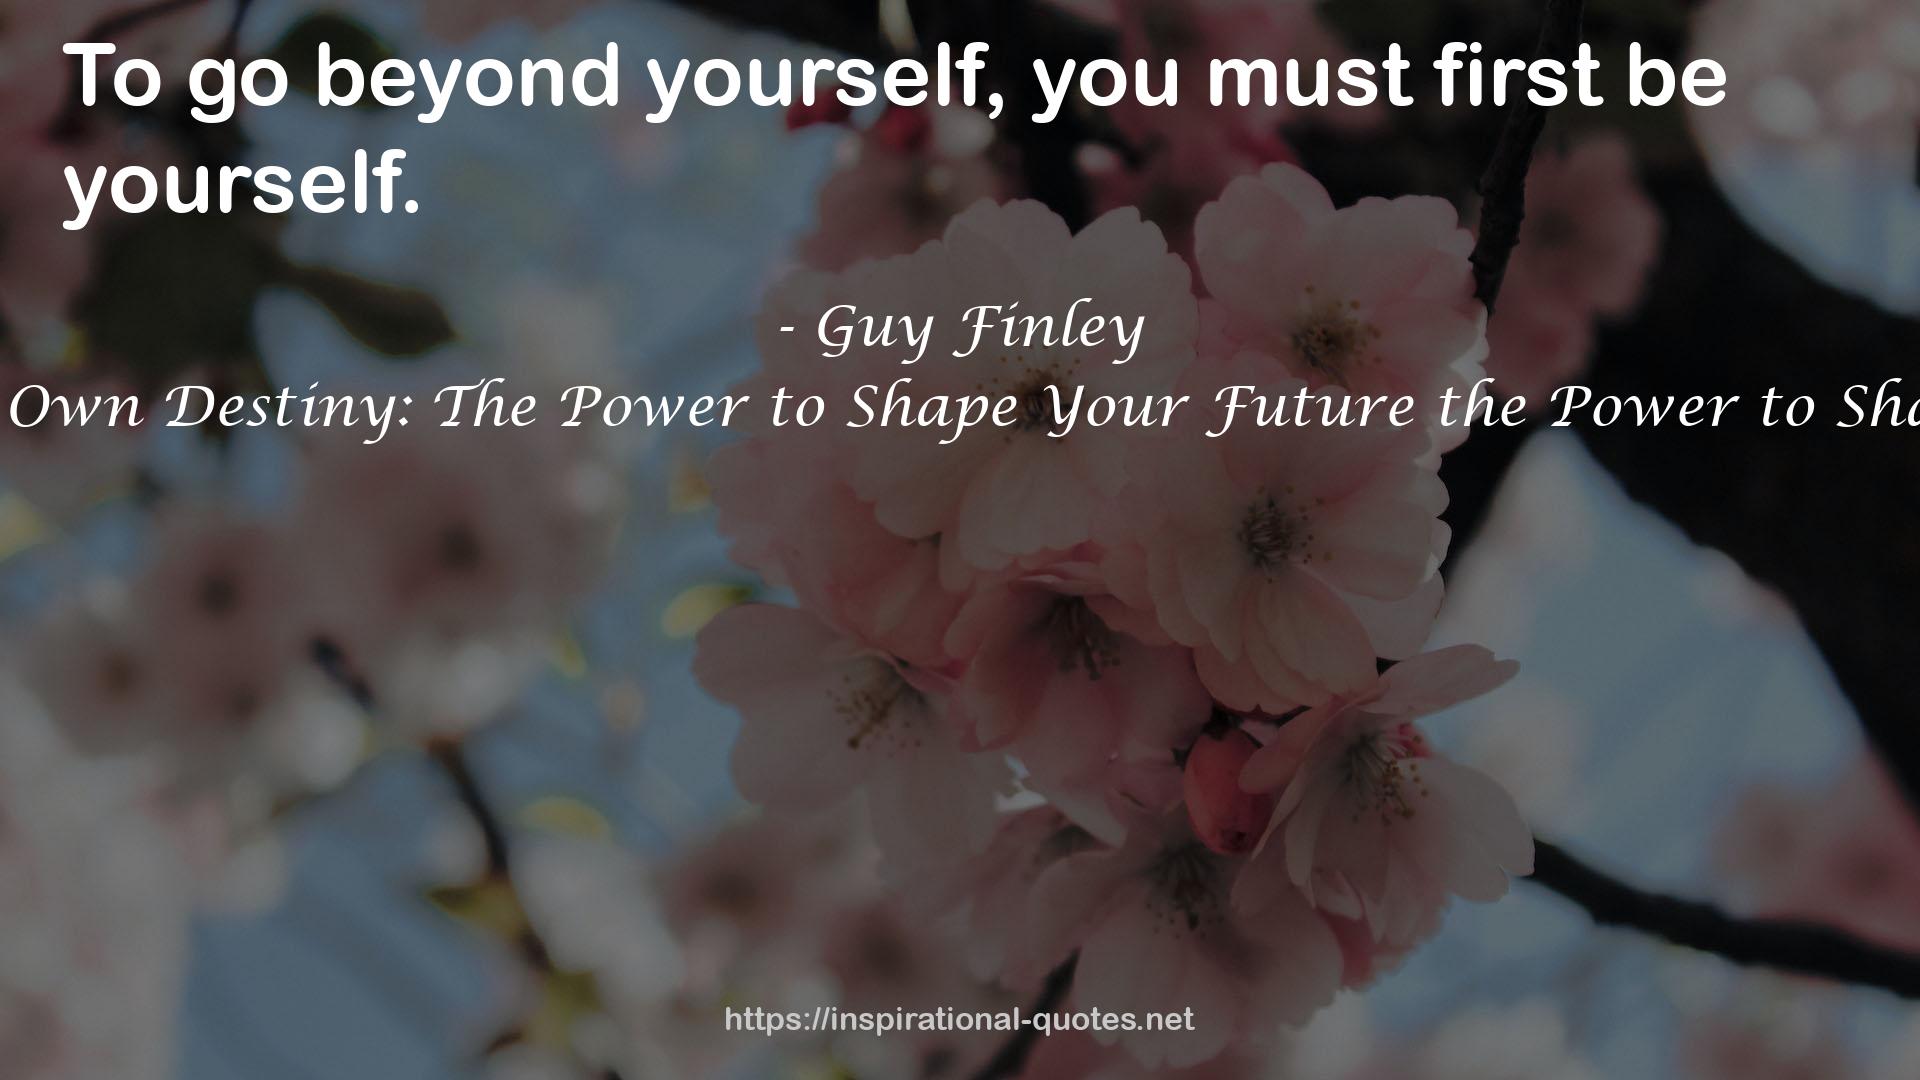 Designing Your Own Destiny: The Power to Shape Your Future the Power to Shape Your Future QUOTES